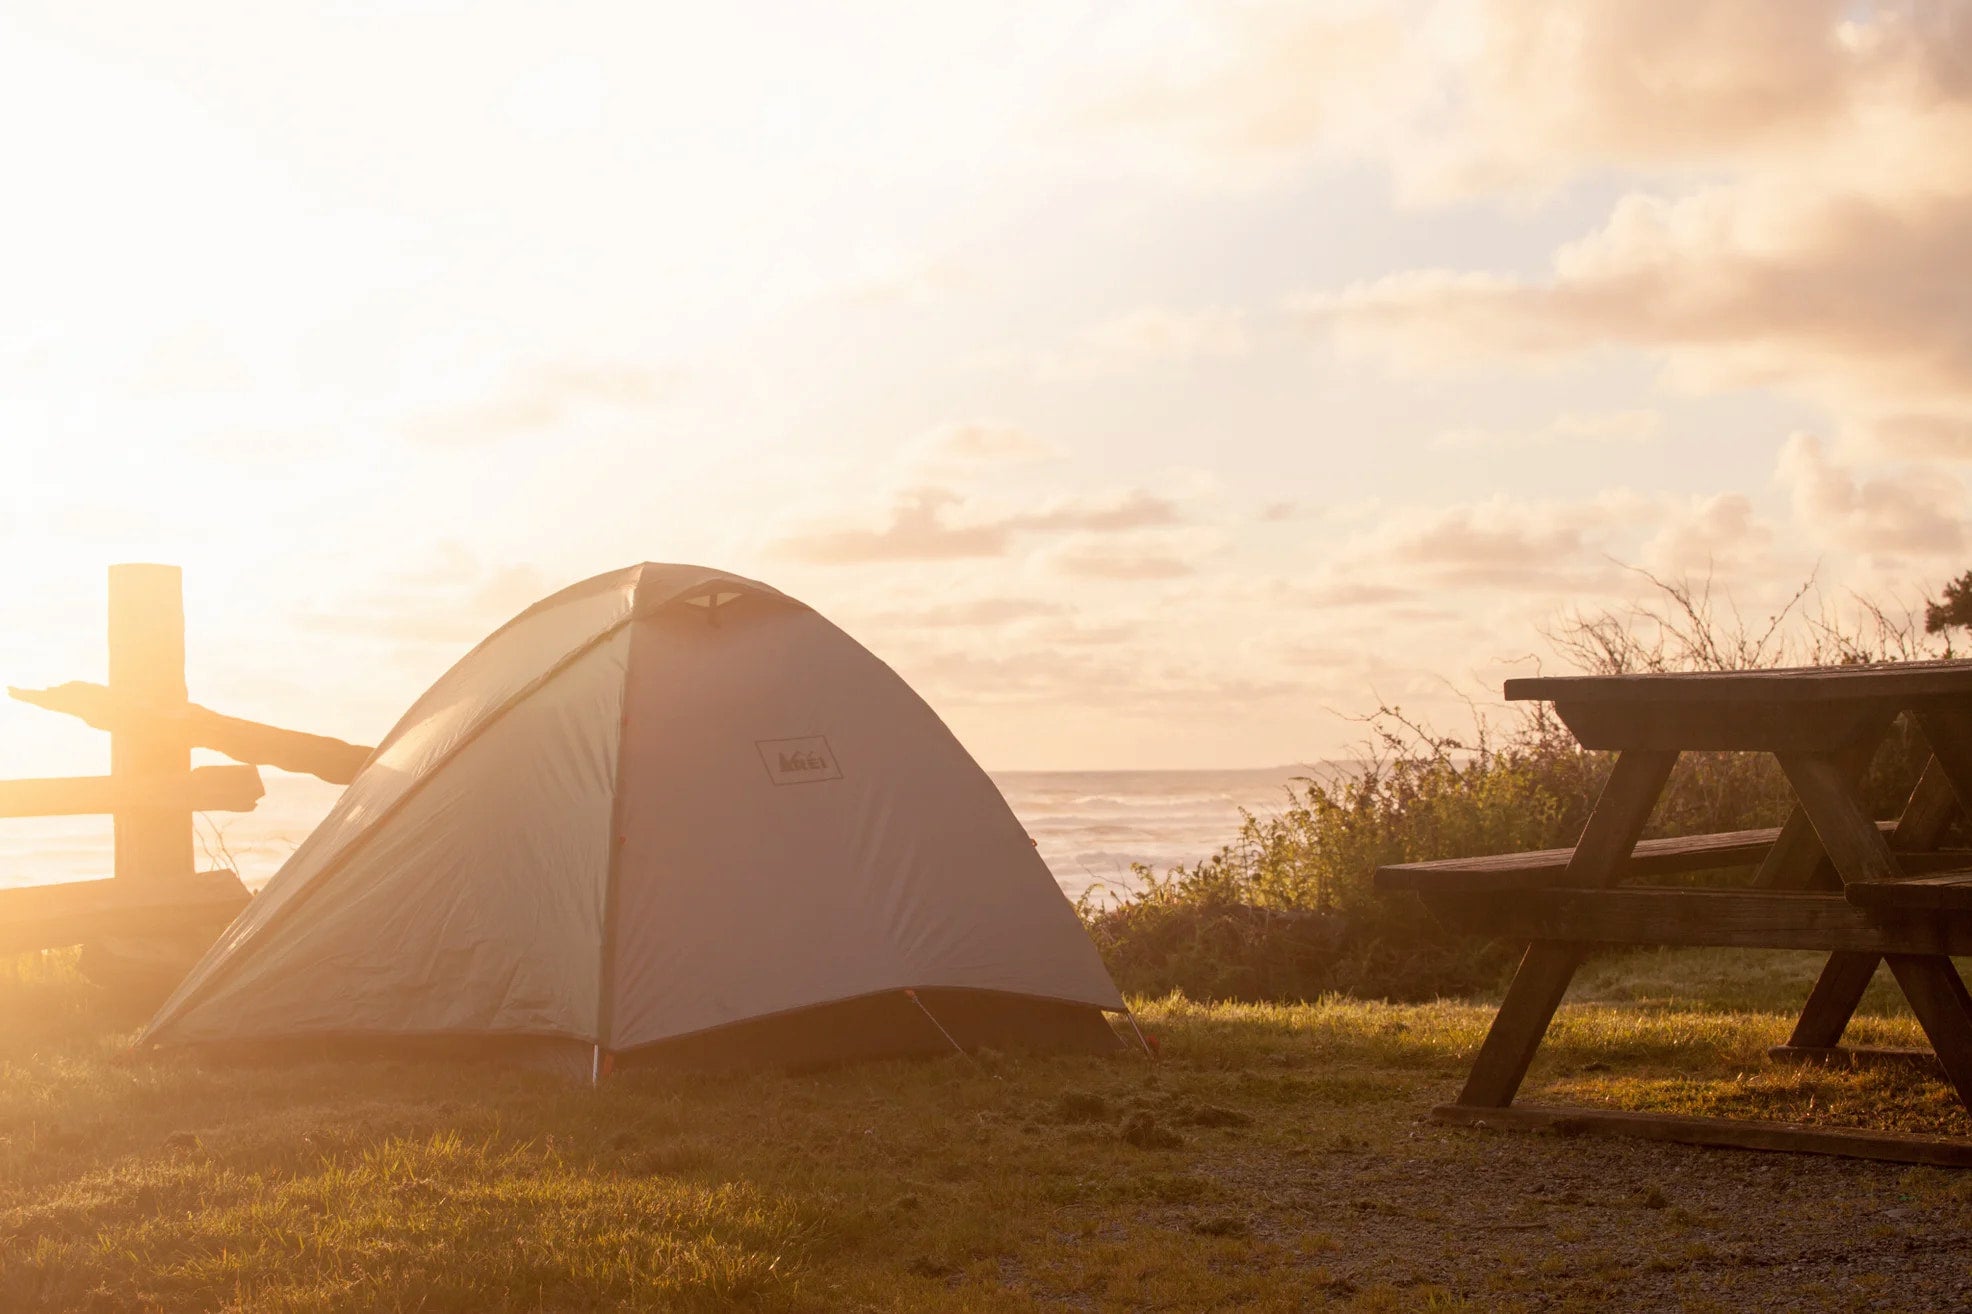 Sunlight beaming over an oceanside campsite along the pacific coast.